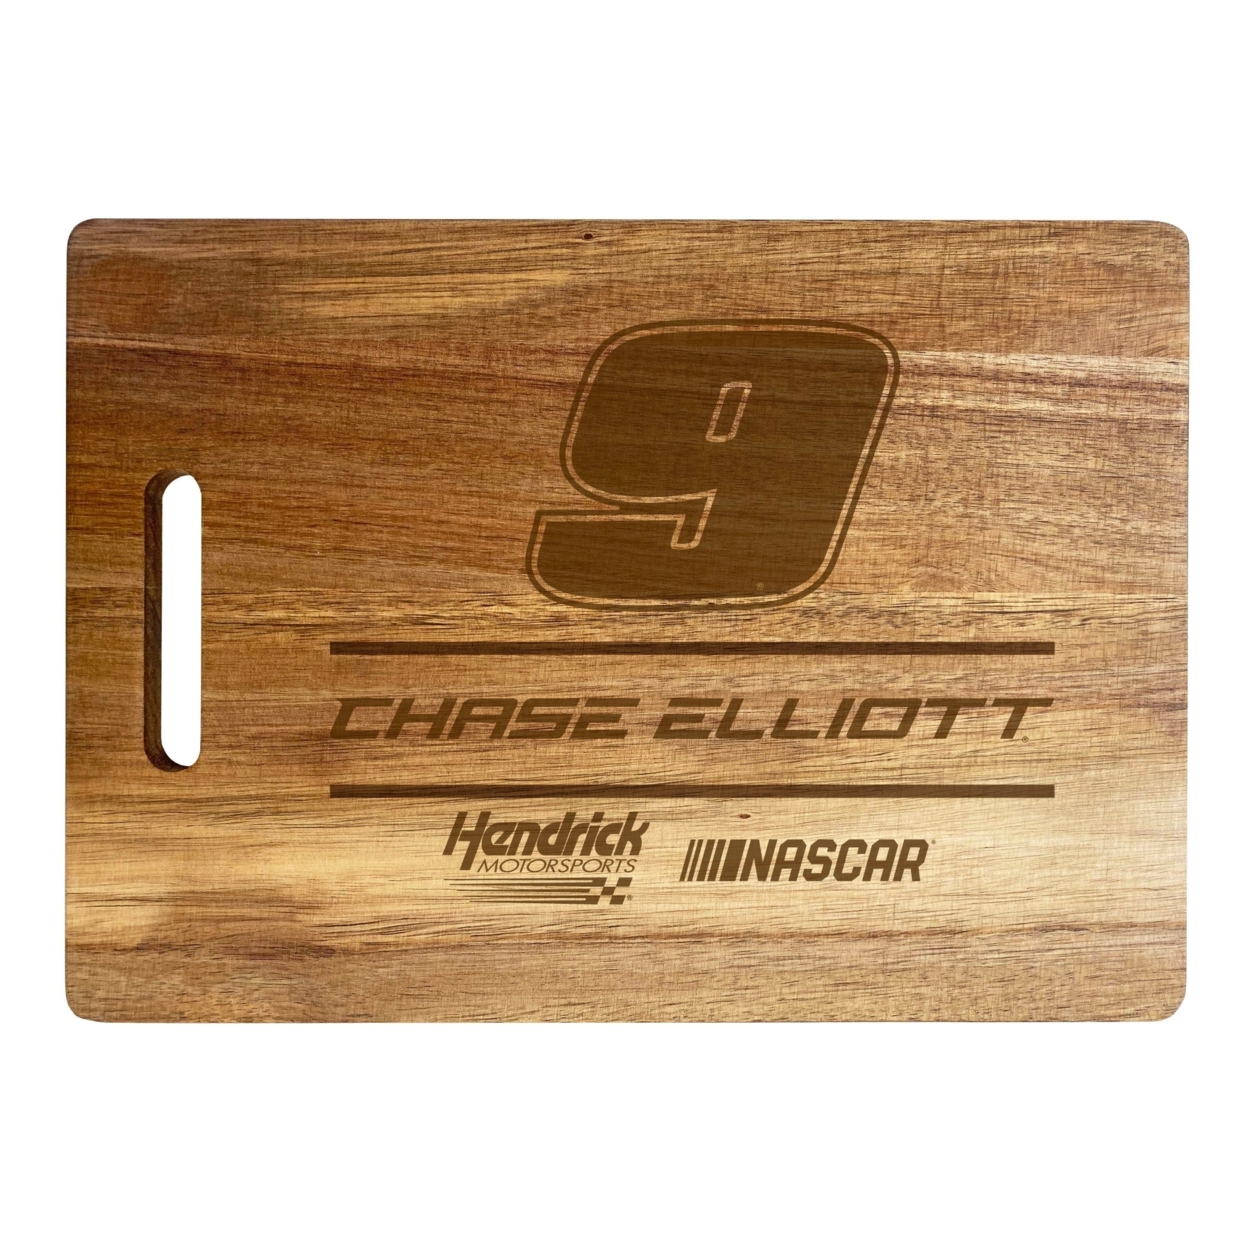 #9 Chase Elliott NASCAR Officially Licensed Engraved Wooden Cutting Board